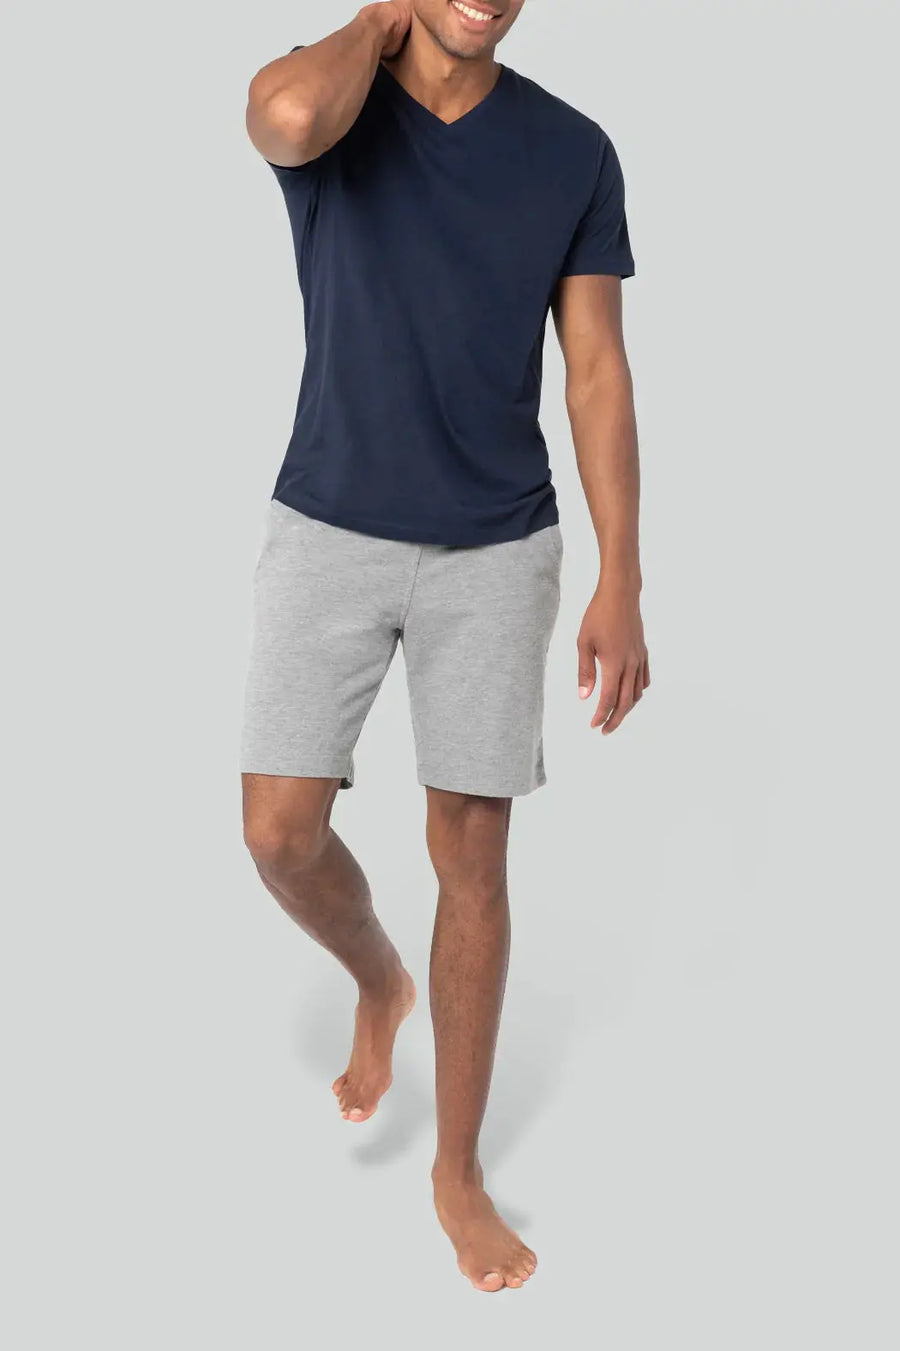 PURE & SIMPLE | Organic Cotton V Neck T-Shirt Navy Pure & Simple